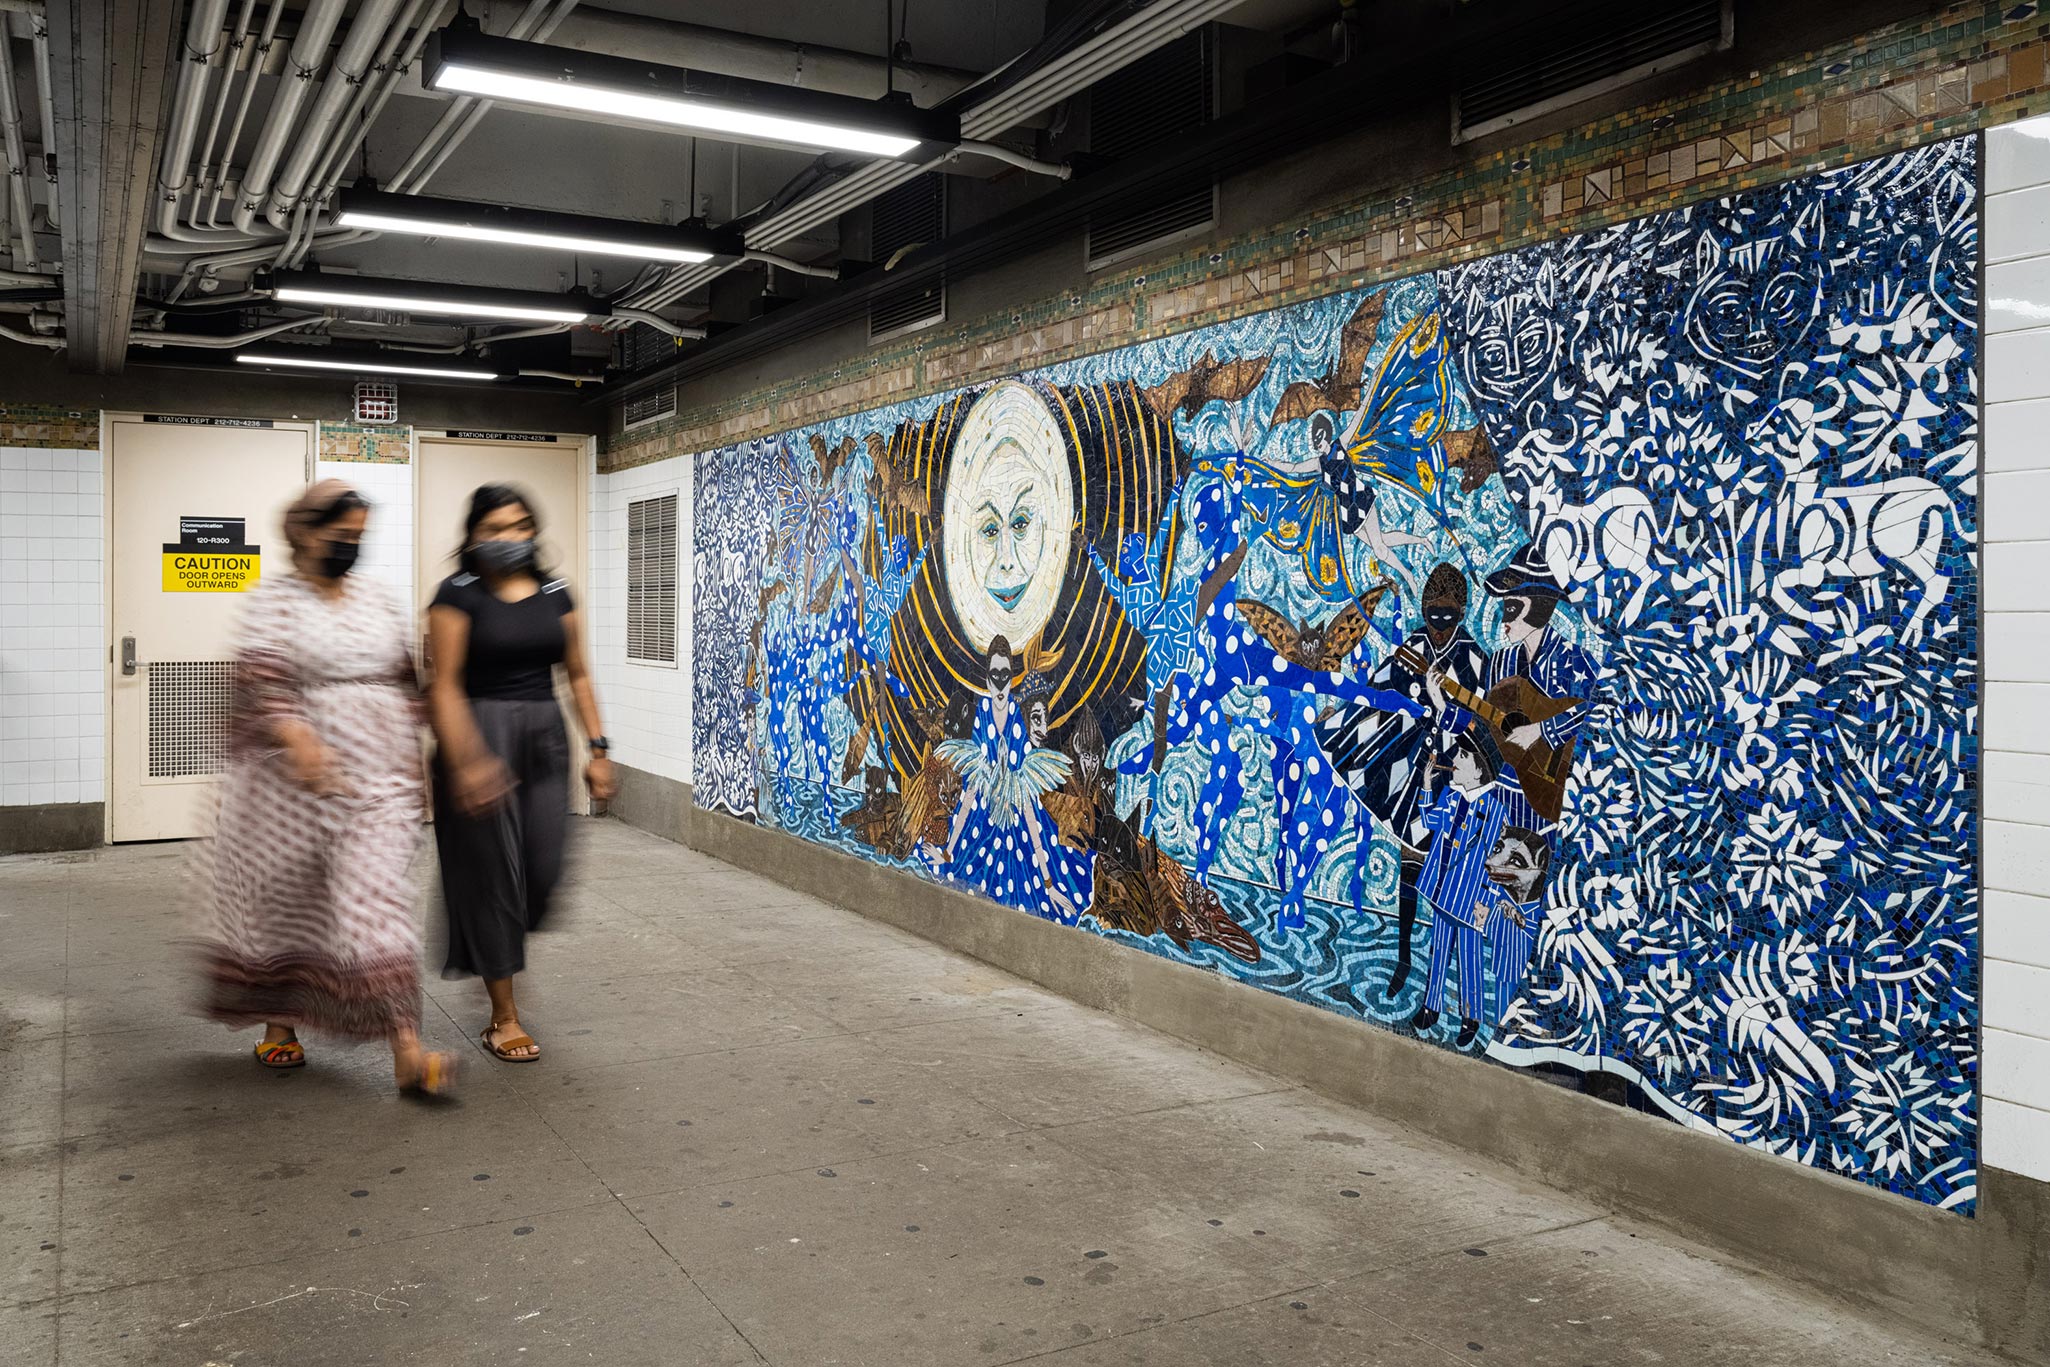 A photo of a mosaic mural by Marcel Dzama, titled No Less Than Everything Comes Together, installed in the subway in New York, in 2021.